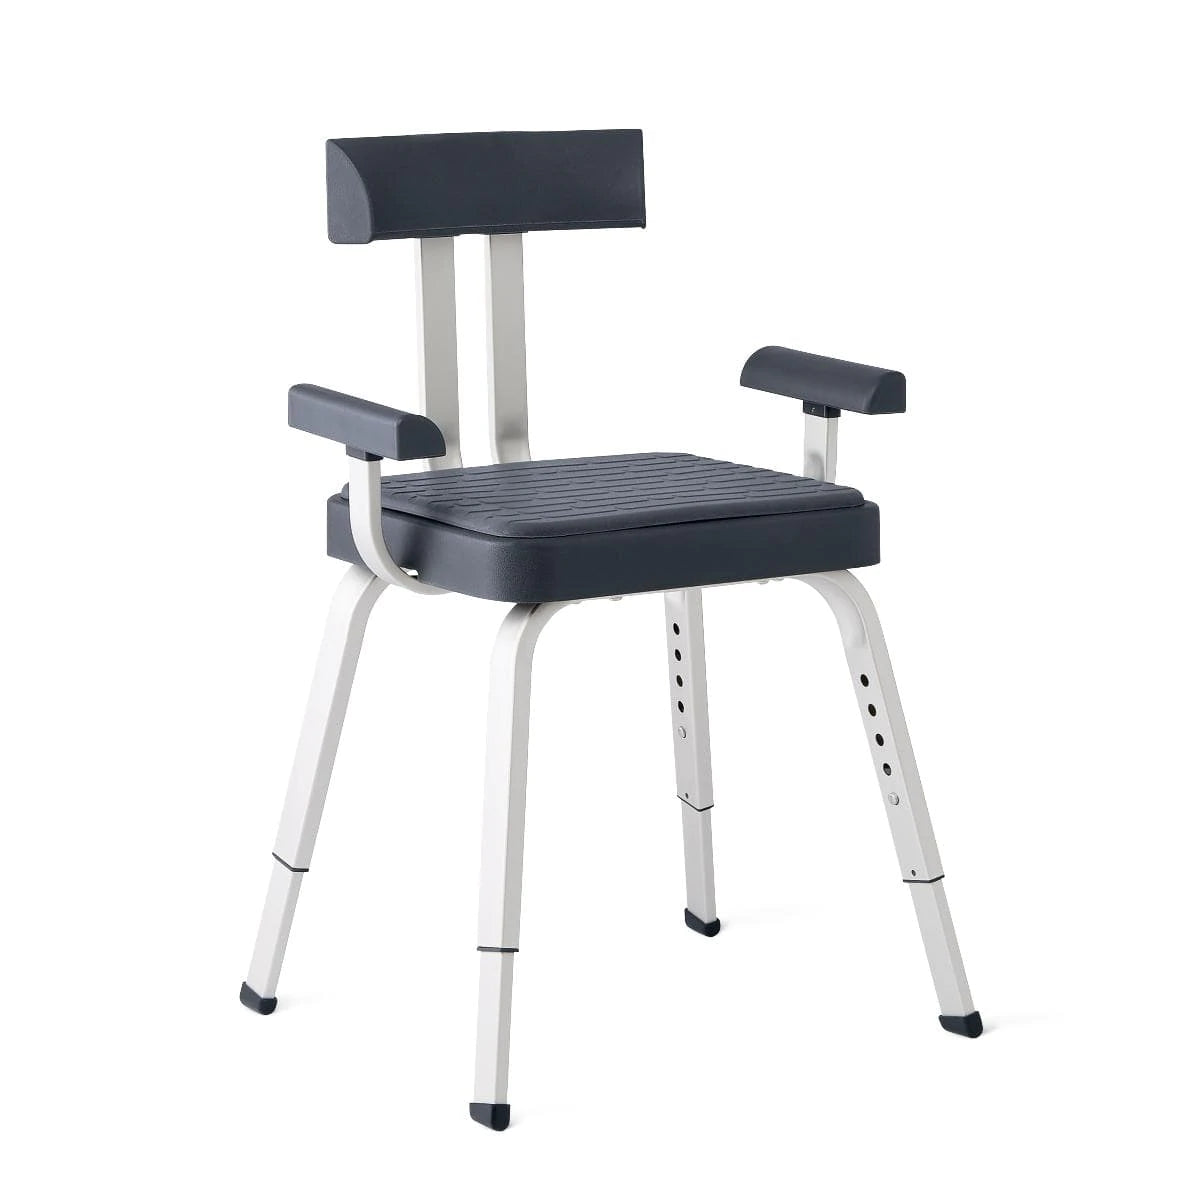 Shower Chairs and Benches - Bath Seats and Chairs for Fall Prevention